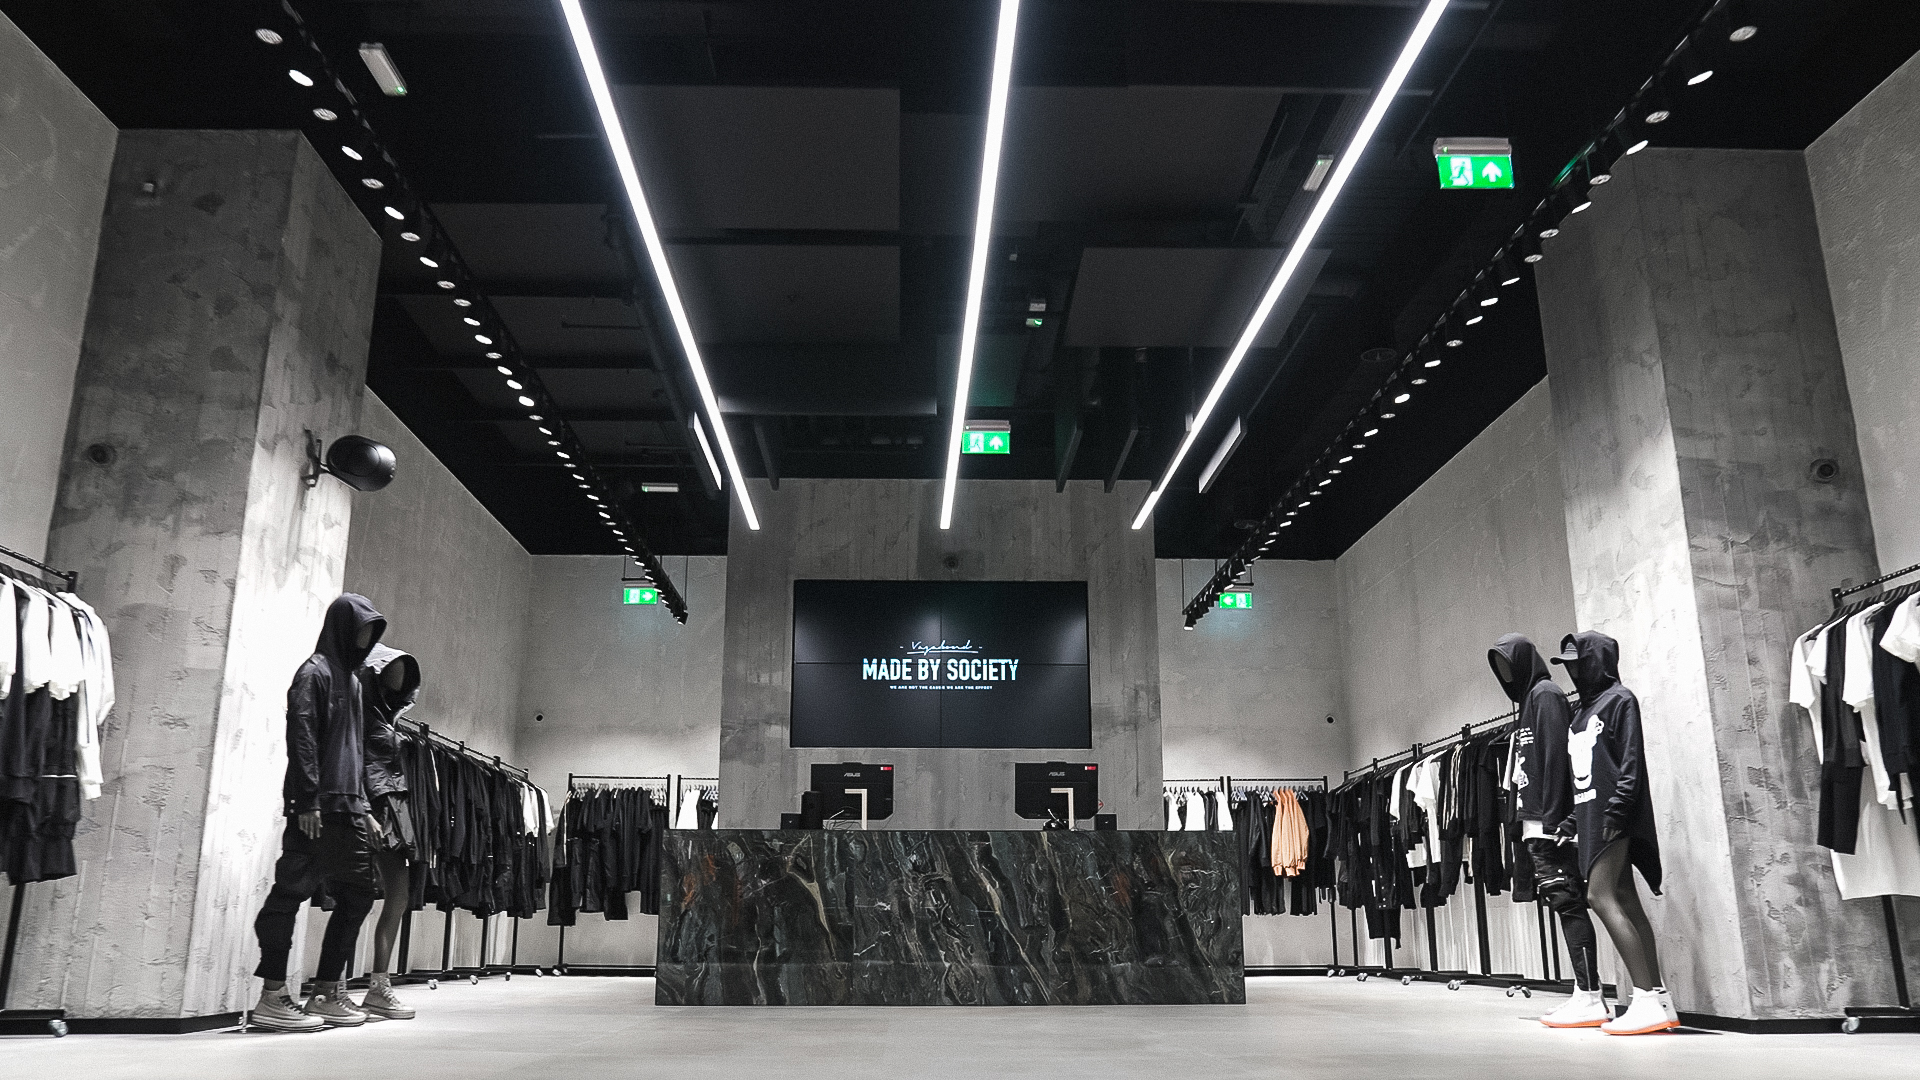 Romanian retailer Vagabond Studio trading under the name „Made by Society” announces its first store abroad, in London, assisted by CBRE Romania and CBRE UK